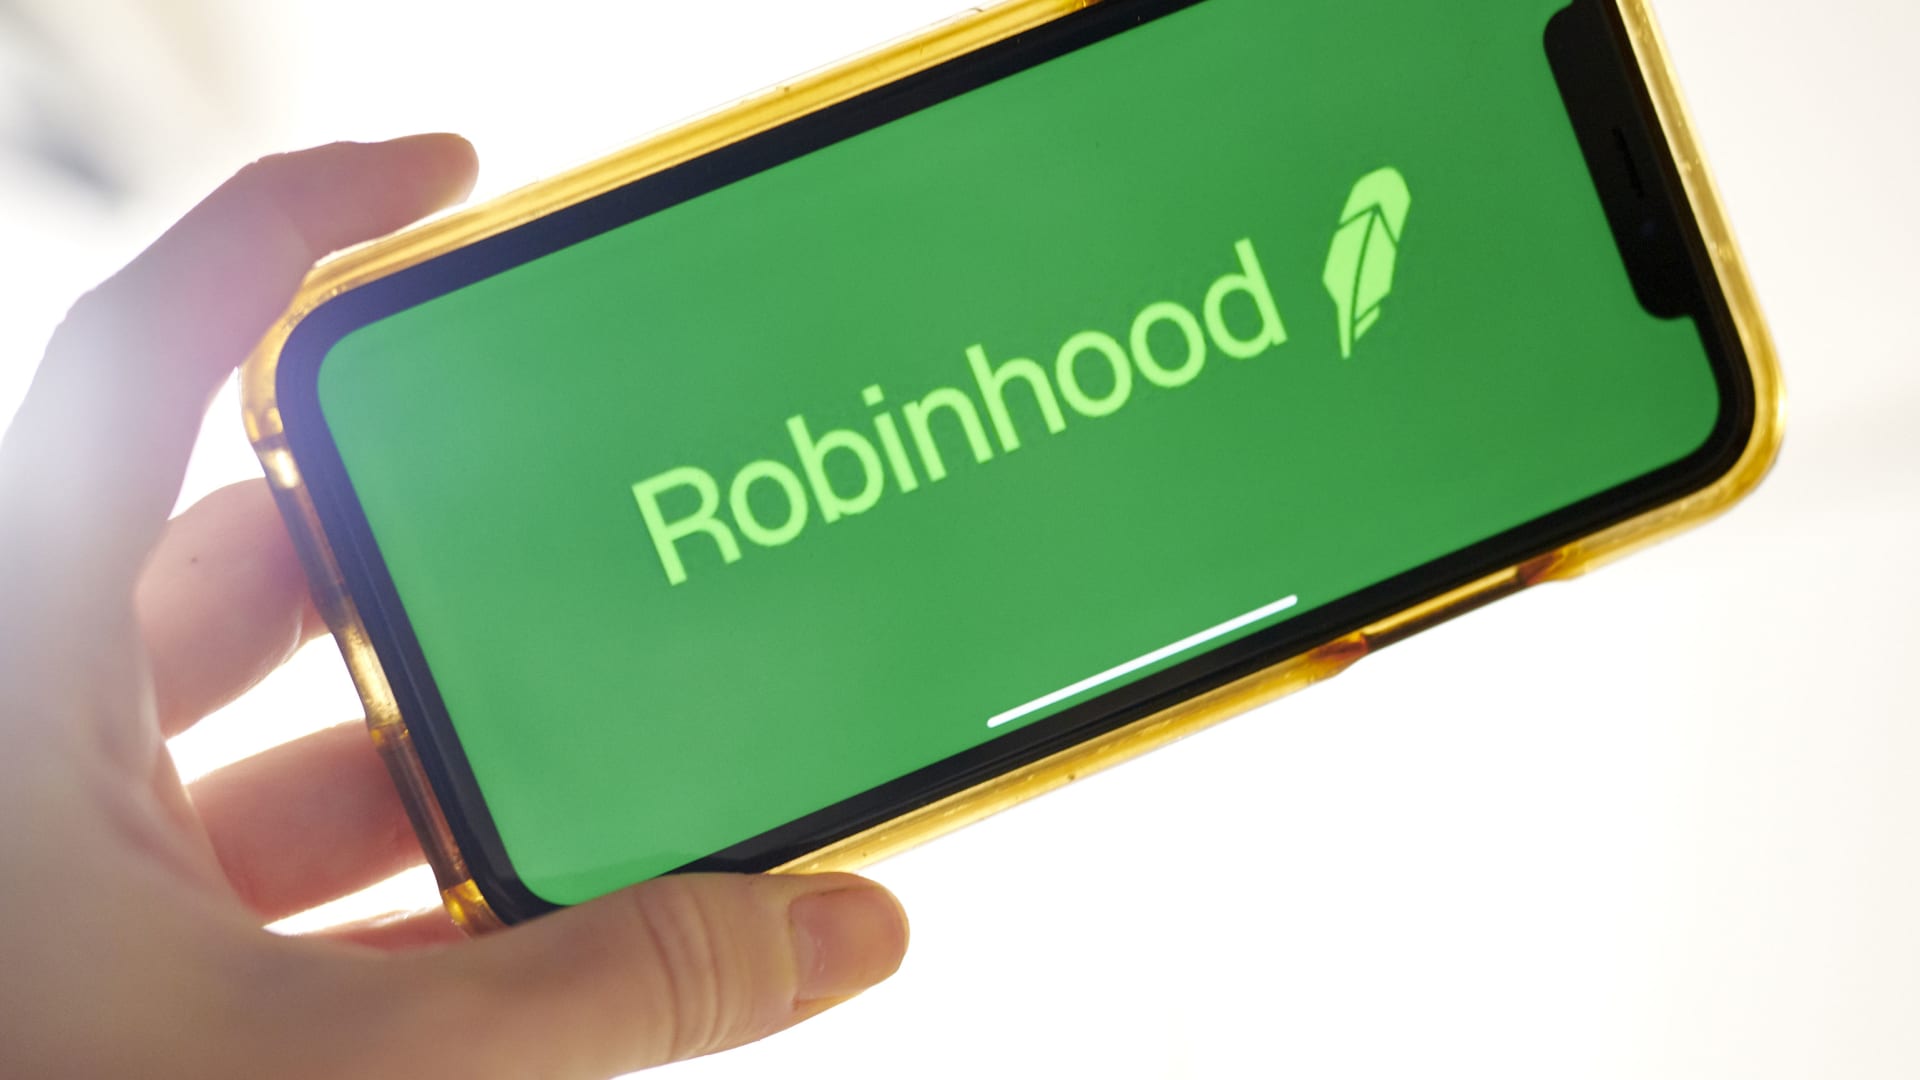 Robinhood reports shrinking revenue, fewer active users - CNBC